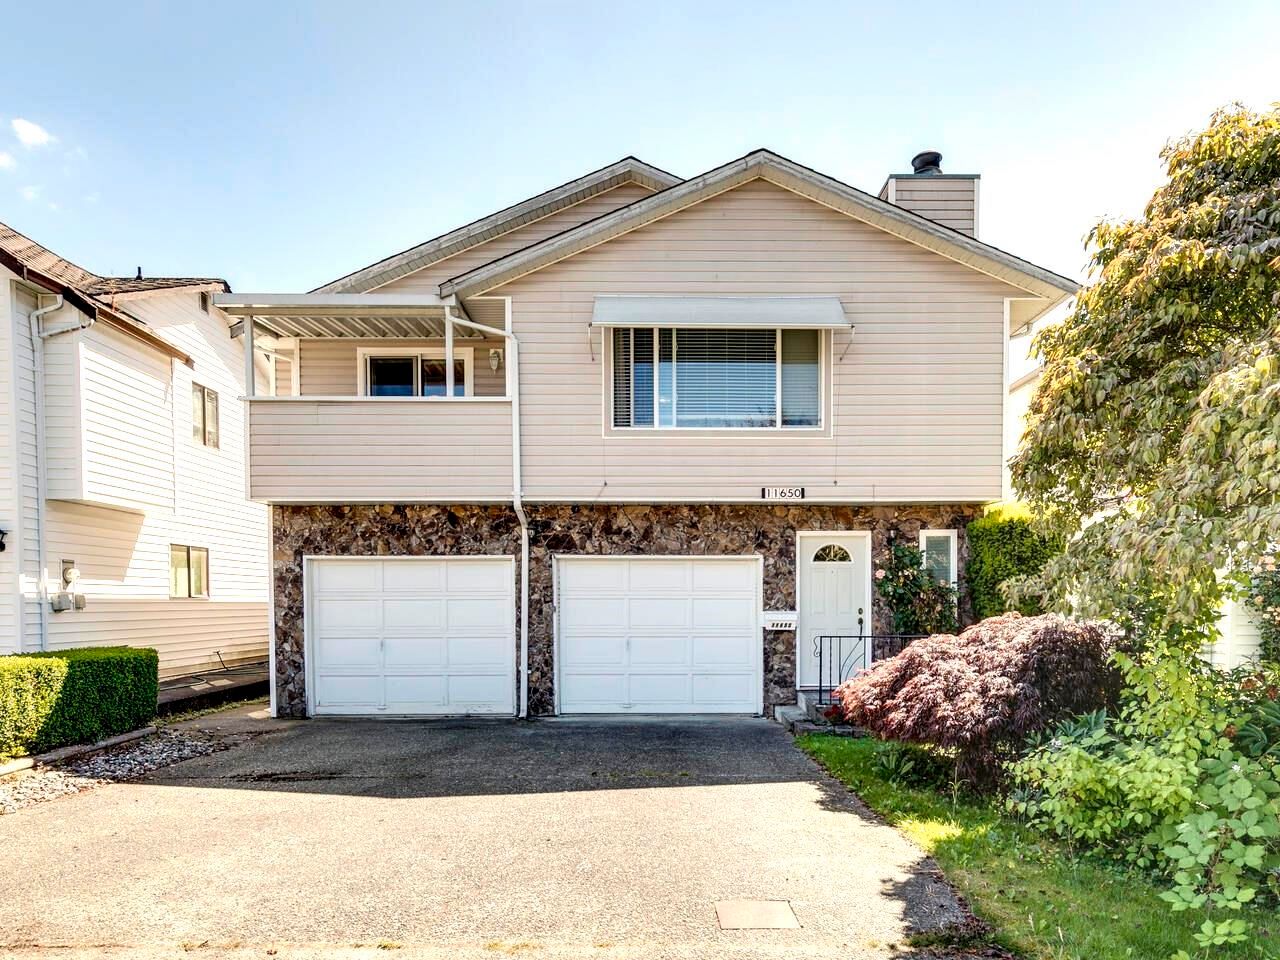 Open House on Sunday, November 6, 2022 11:00AM - 1:00PM
This is a MUST SEE & has to be one of the best buys in Maple Ridge. Great home with a great setting and a great South-West Maple Ridge location.  See for yourself.  You'll be very glad you did!